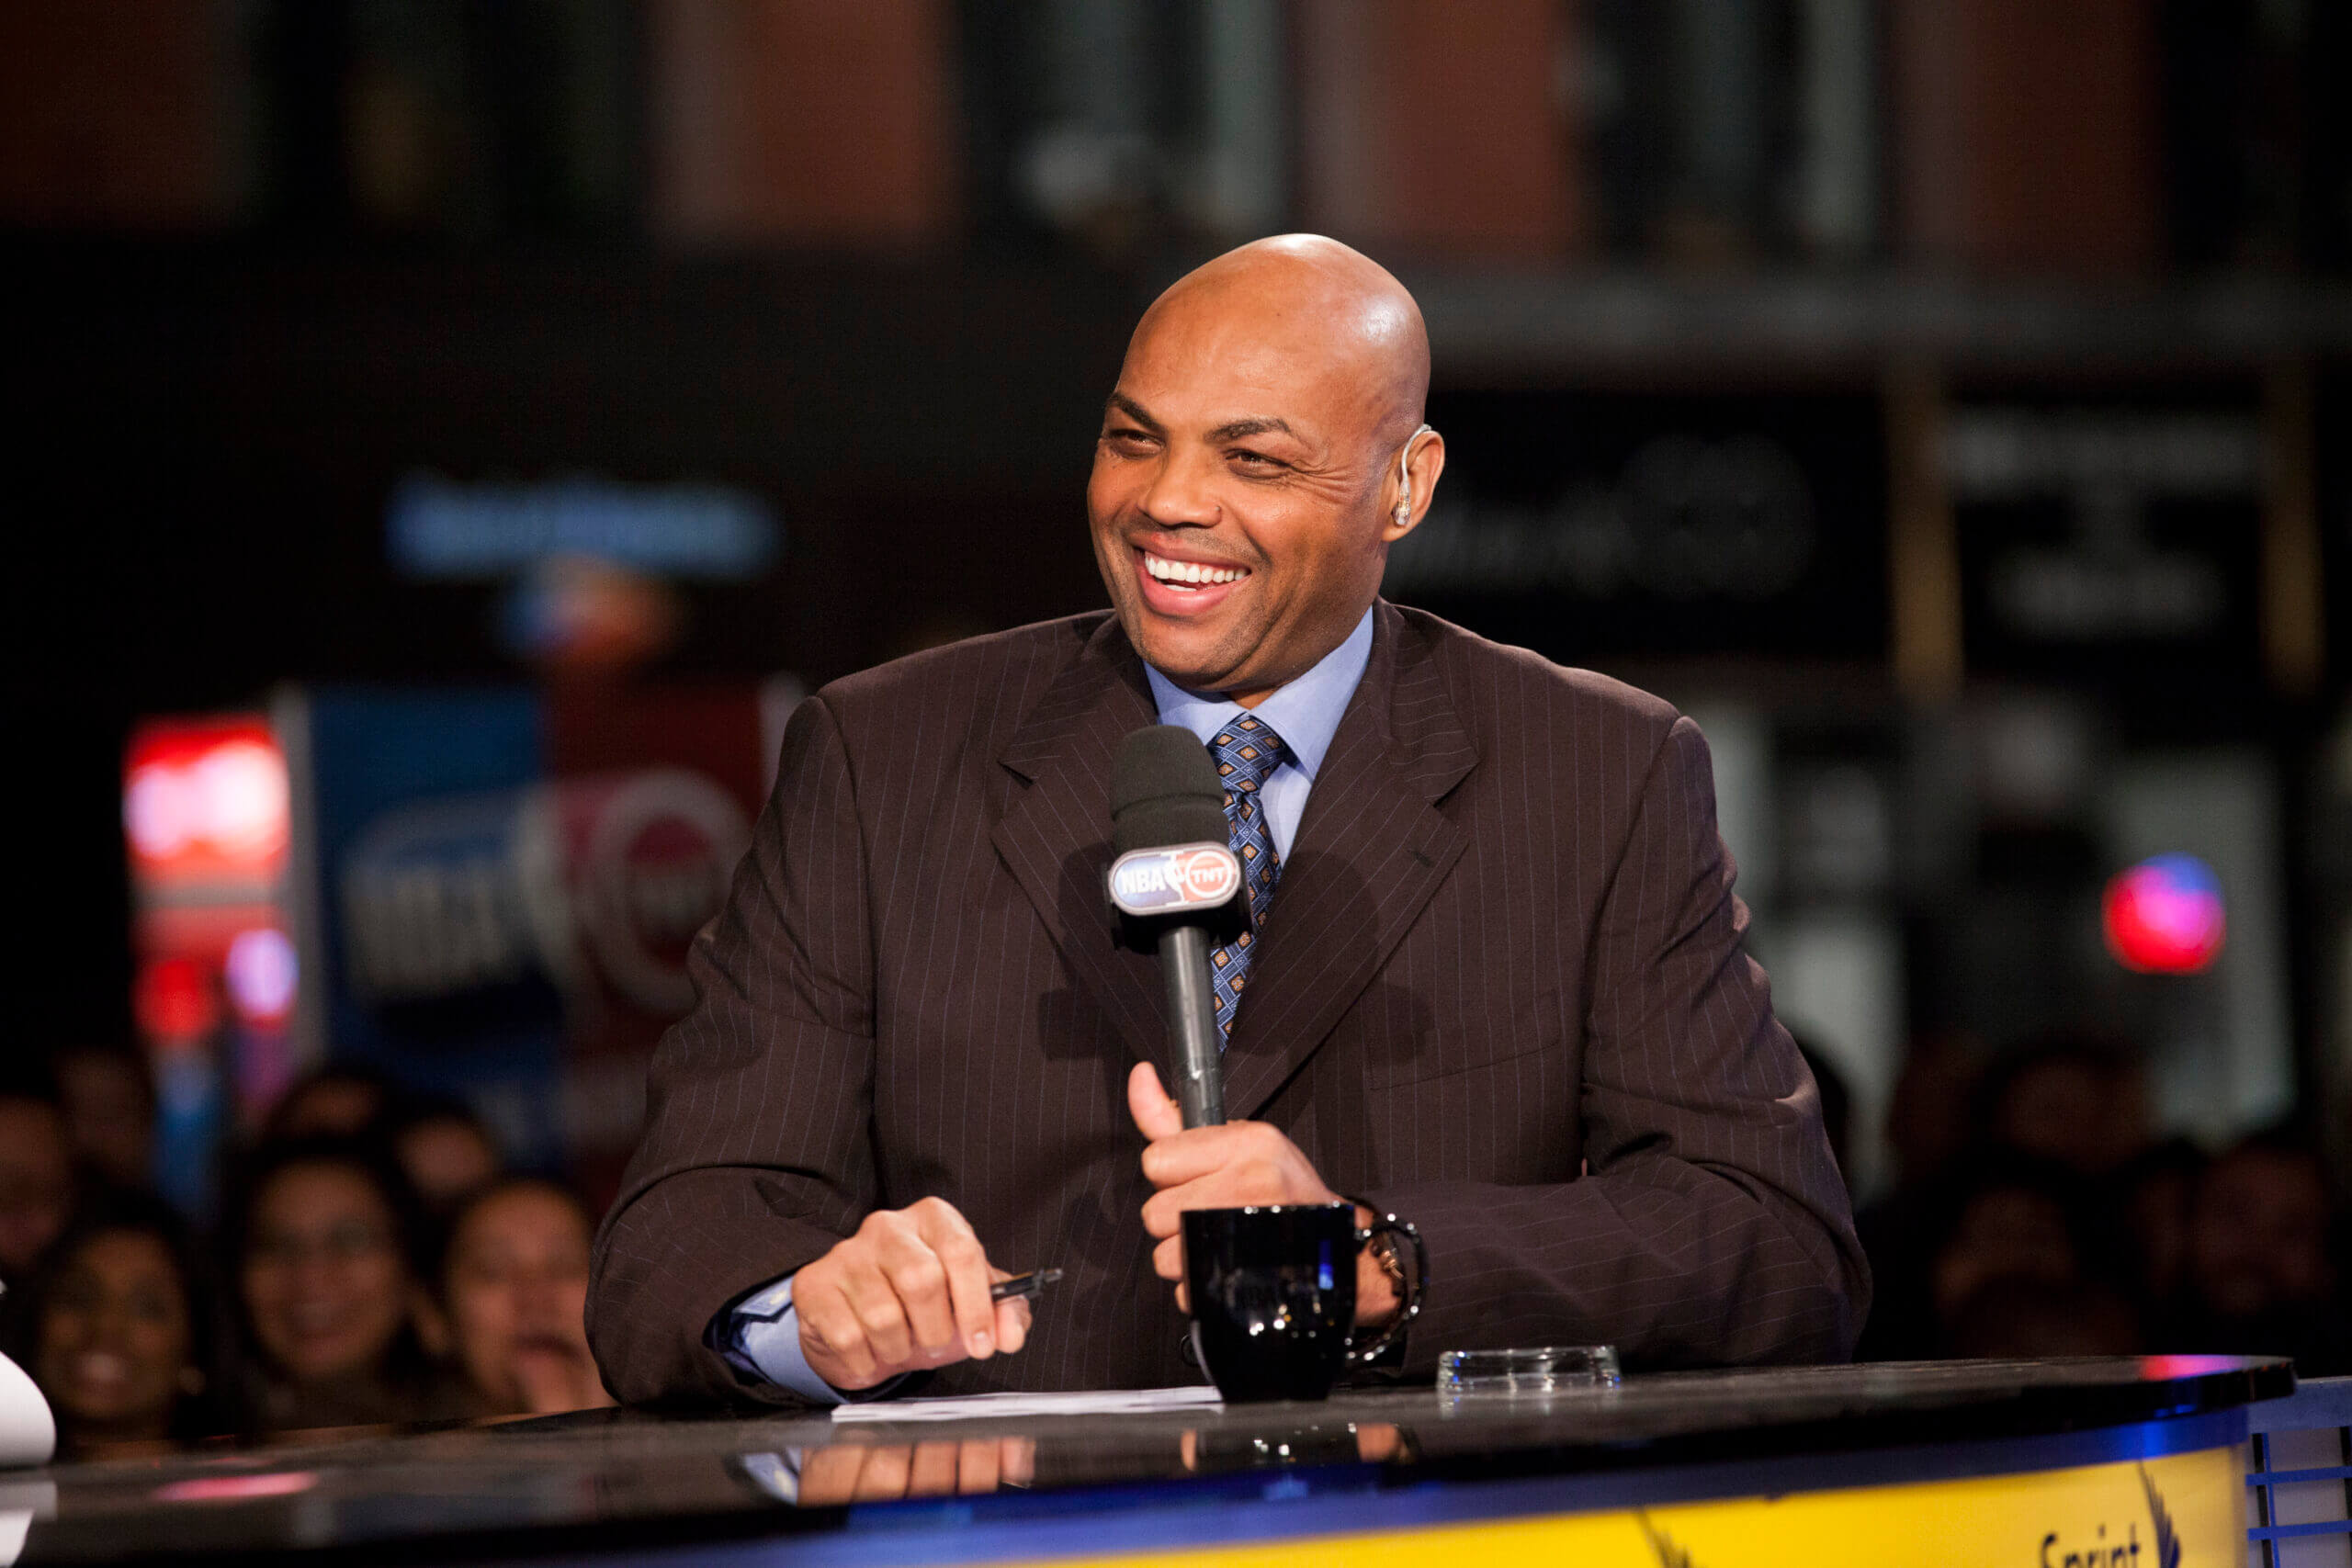 Charles Barkley considers deals with ESPN, NBC and Amazon if TNT doesn't fully fulfill $210 million contract